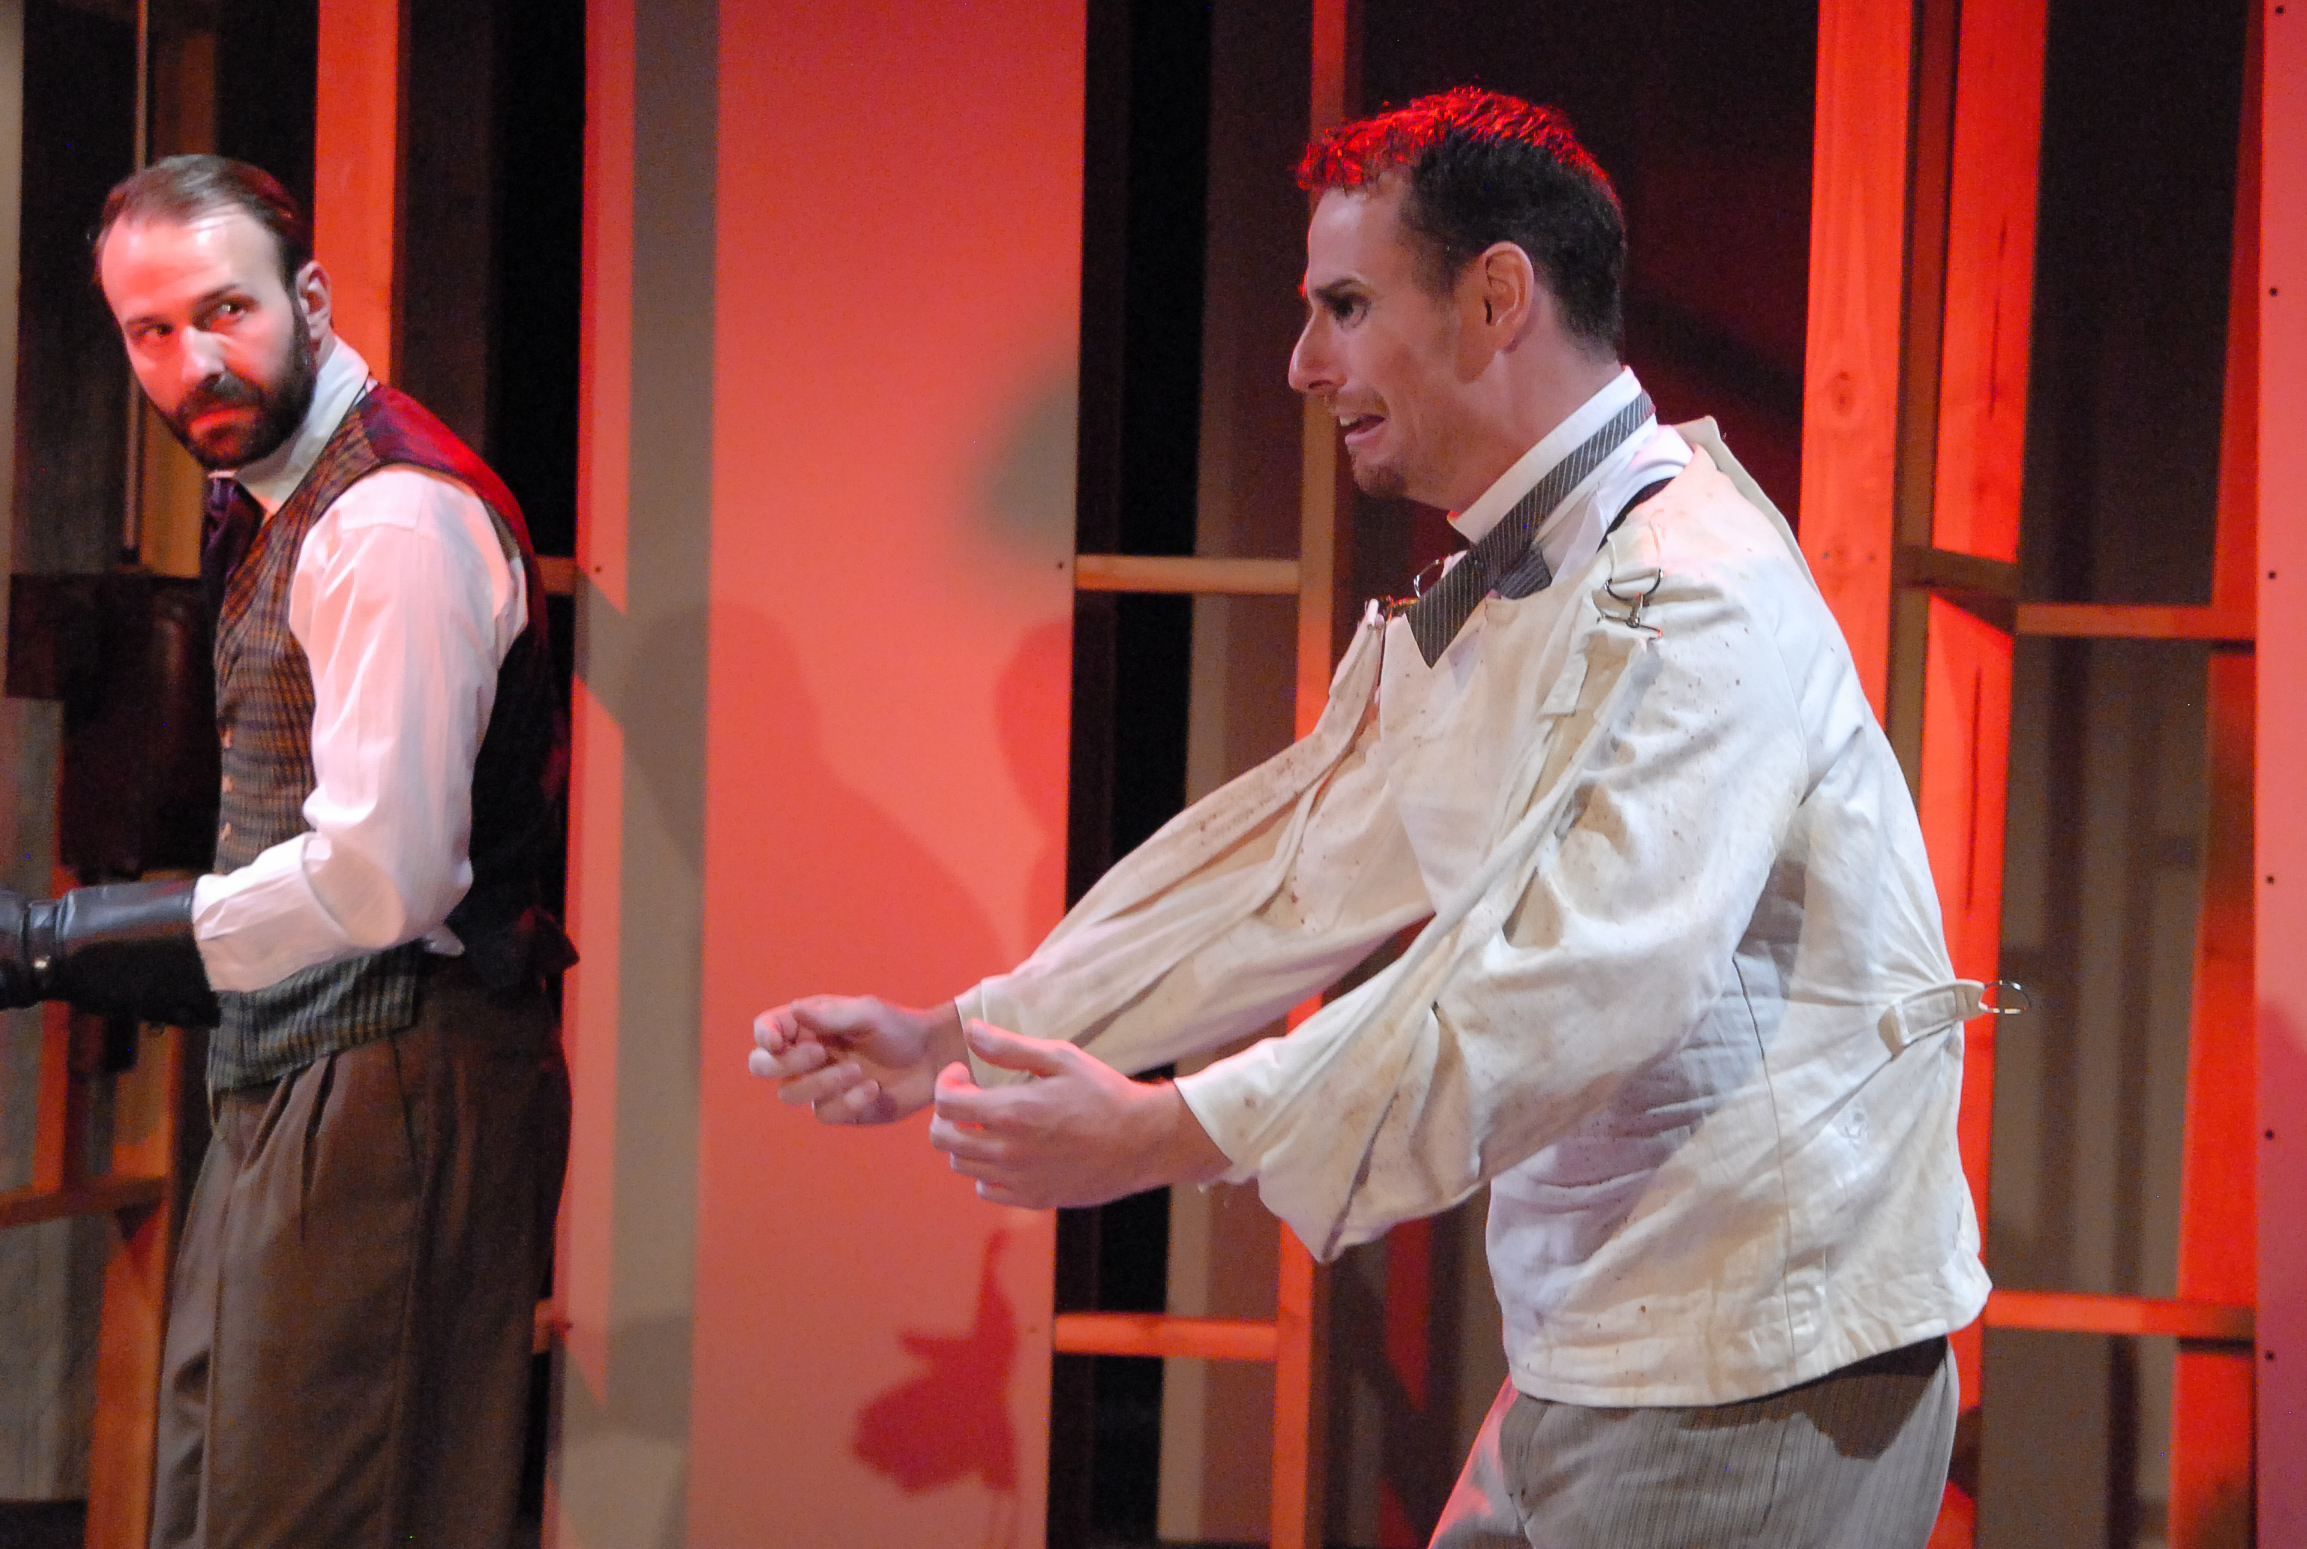 (from left to right) Thaddeus Shafer as DR. DUCHENNE and Andrew Eldredge as PEPE. Photo courtesy of Elena Flores.